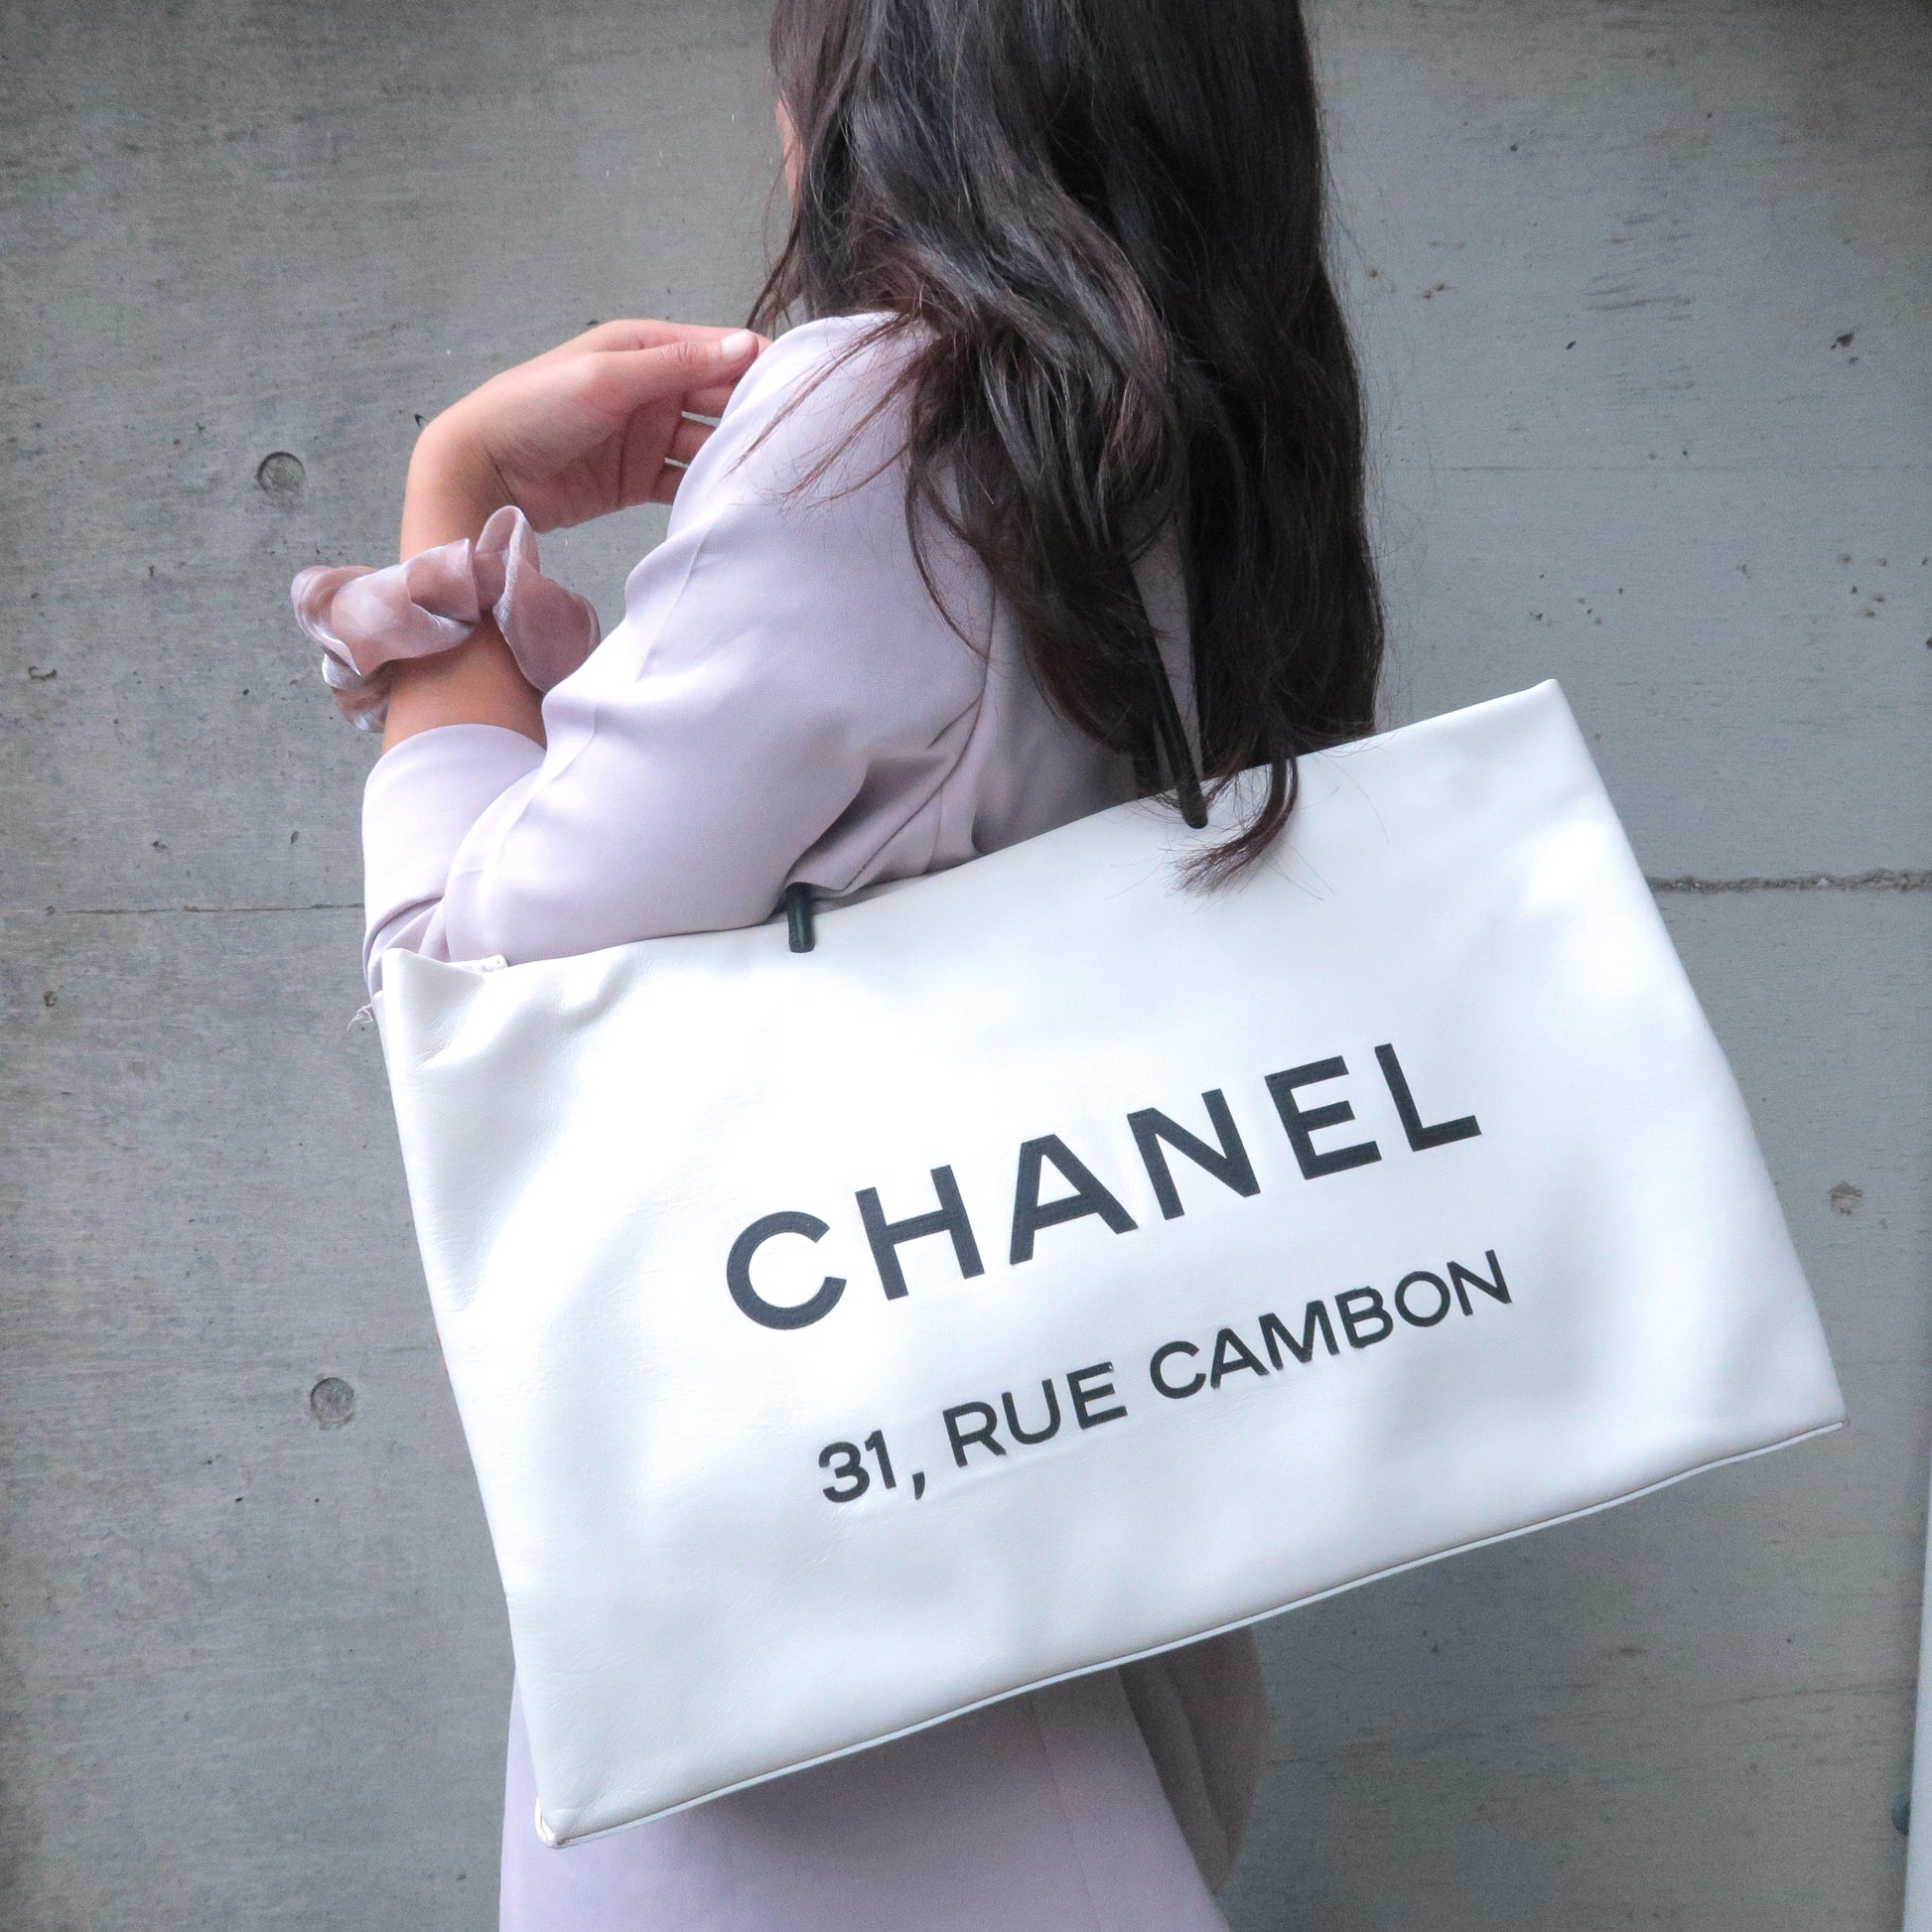 Chanel Gabrielle Large Shopping Tote Bag